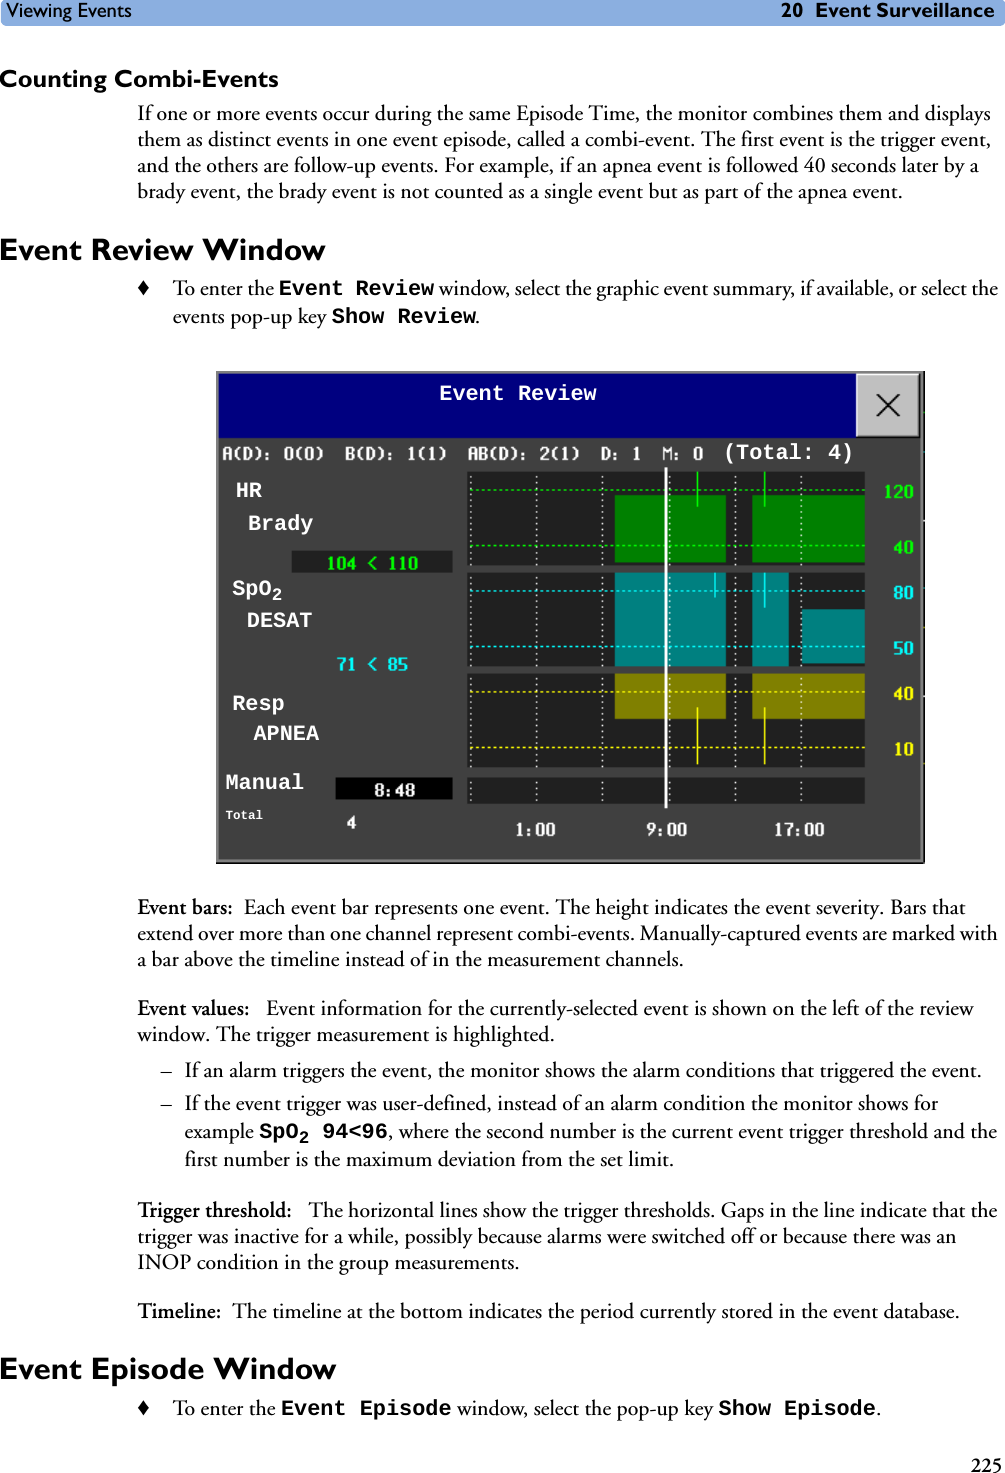 Viewing Events 20 Event Surveillance225Counting Combi-EventsIf one or more events occur during the same Episode Time, the monitor combines them and displays them as distinct events in one event episode, called a combi-event. The first event is the trigger event, and the others are follow-up events. For example, if an apnea event is followed 40 seconds later by a brady event, the brady event is not counted as a single event but as part of the apnea event. Event Review Window♦To enter the Event Review window, select the graphic event summary, if available, or select the events pop-up key Show Review. Event bars: Each event bar represents one event. The height indicates the event severity. Bars that extend over more than one channel represent combi-events. Manually-captured events are marked with a bar above the timeline instead of in the measurement channels. Event values:  Event information for the currently-selected event is shown on the left of the review window. The trigger measurement is highlighted. – If an alarm triggers the event, the monitor shows the alarm conditions that triggered the event. – If the event trigger was user-defined, instead of an alarm condition the monitor shows for example SpO294&lt;96, where the second number is the current event trigger threshold and the first number is the maximum deviation from the set limit. Trigger threshold:  The horizontal lines show the trigger thresholds. Gaps in the line indicate that the trigger was inactive for a while, possibly because alarms were switched off or because there was an INOP condition in the group measurements.Timeline: The timeline at the bottom indicates the period currently stored in the event database.Event Episode Window ♦To enter the Event Episode window, select the pop-up key Show Episode.HR Event Review(Total: 4)SpO2 Resp ManualTotalBradyDESATAPNEA